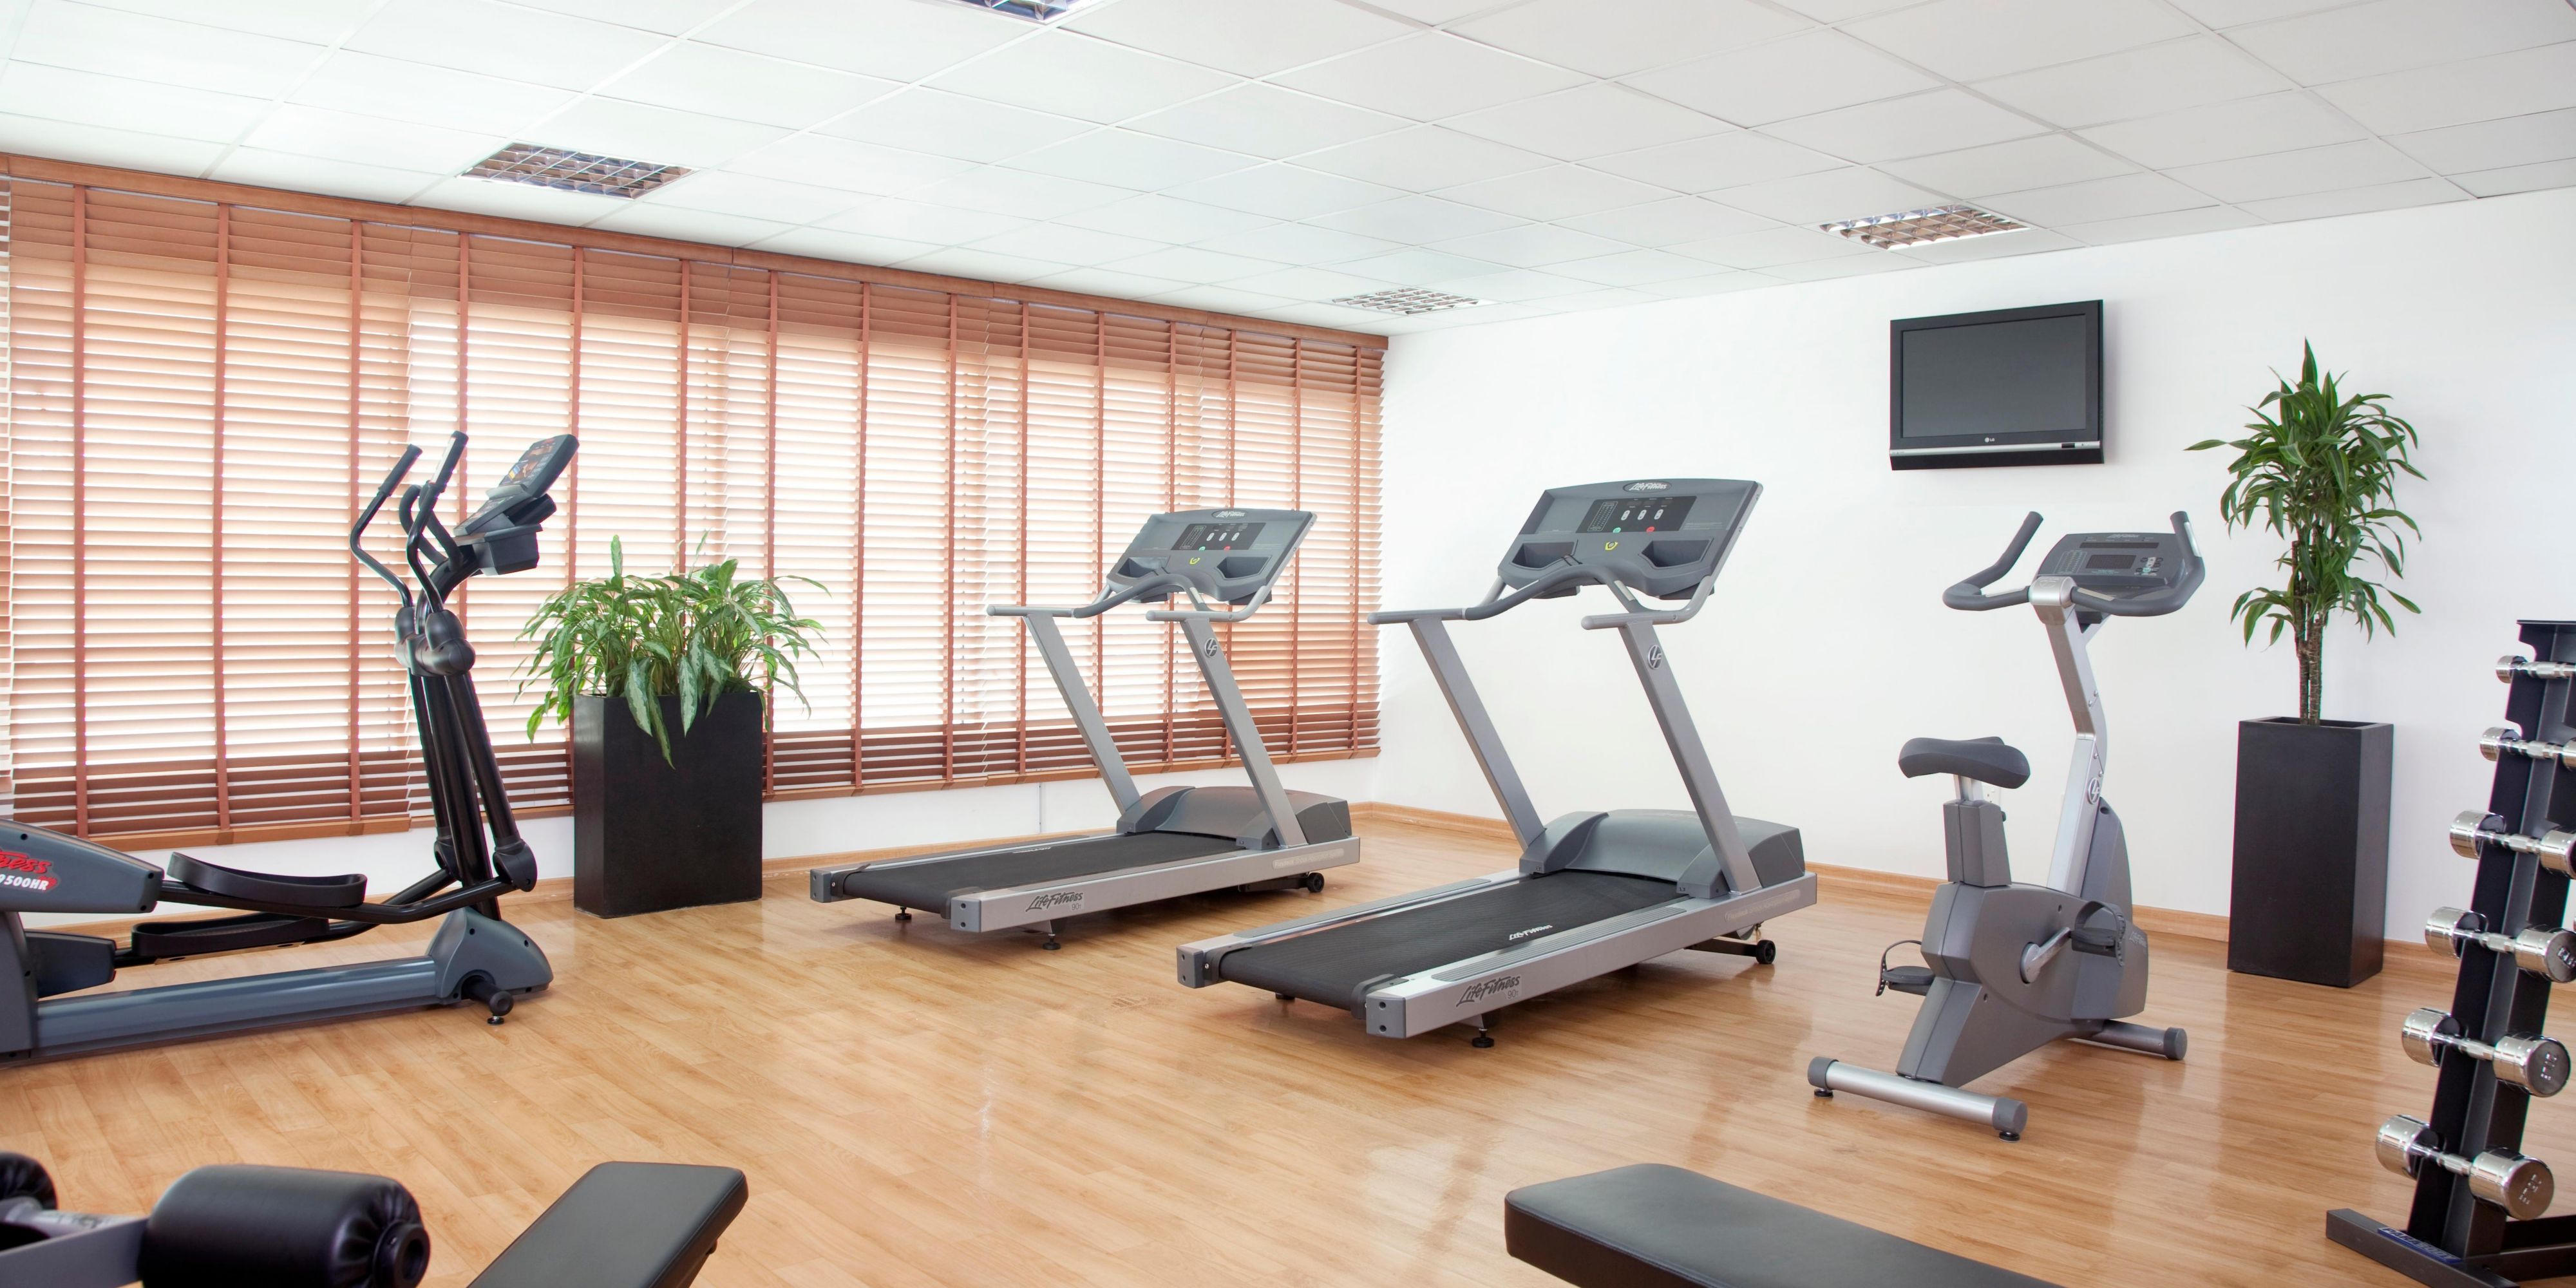 A 24hr gym with views of Burj Khalifa ready to provide all the necessary features to stay fit while enjoying Dubai.